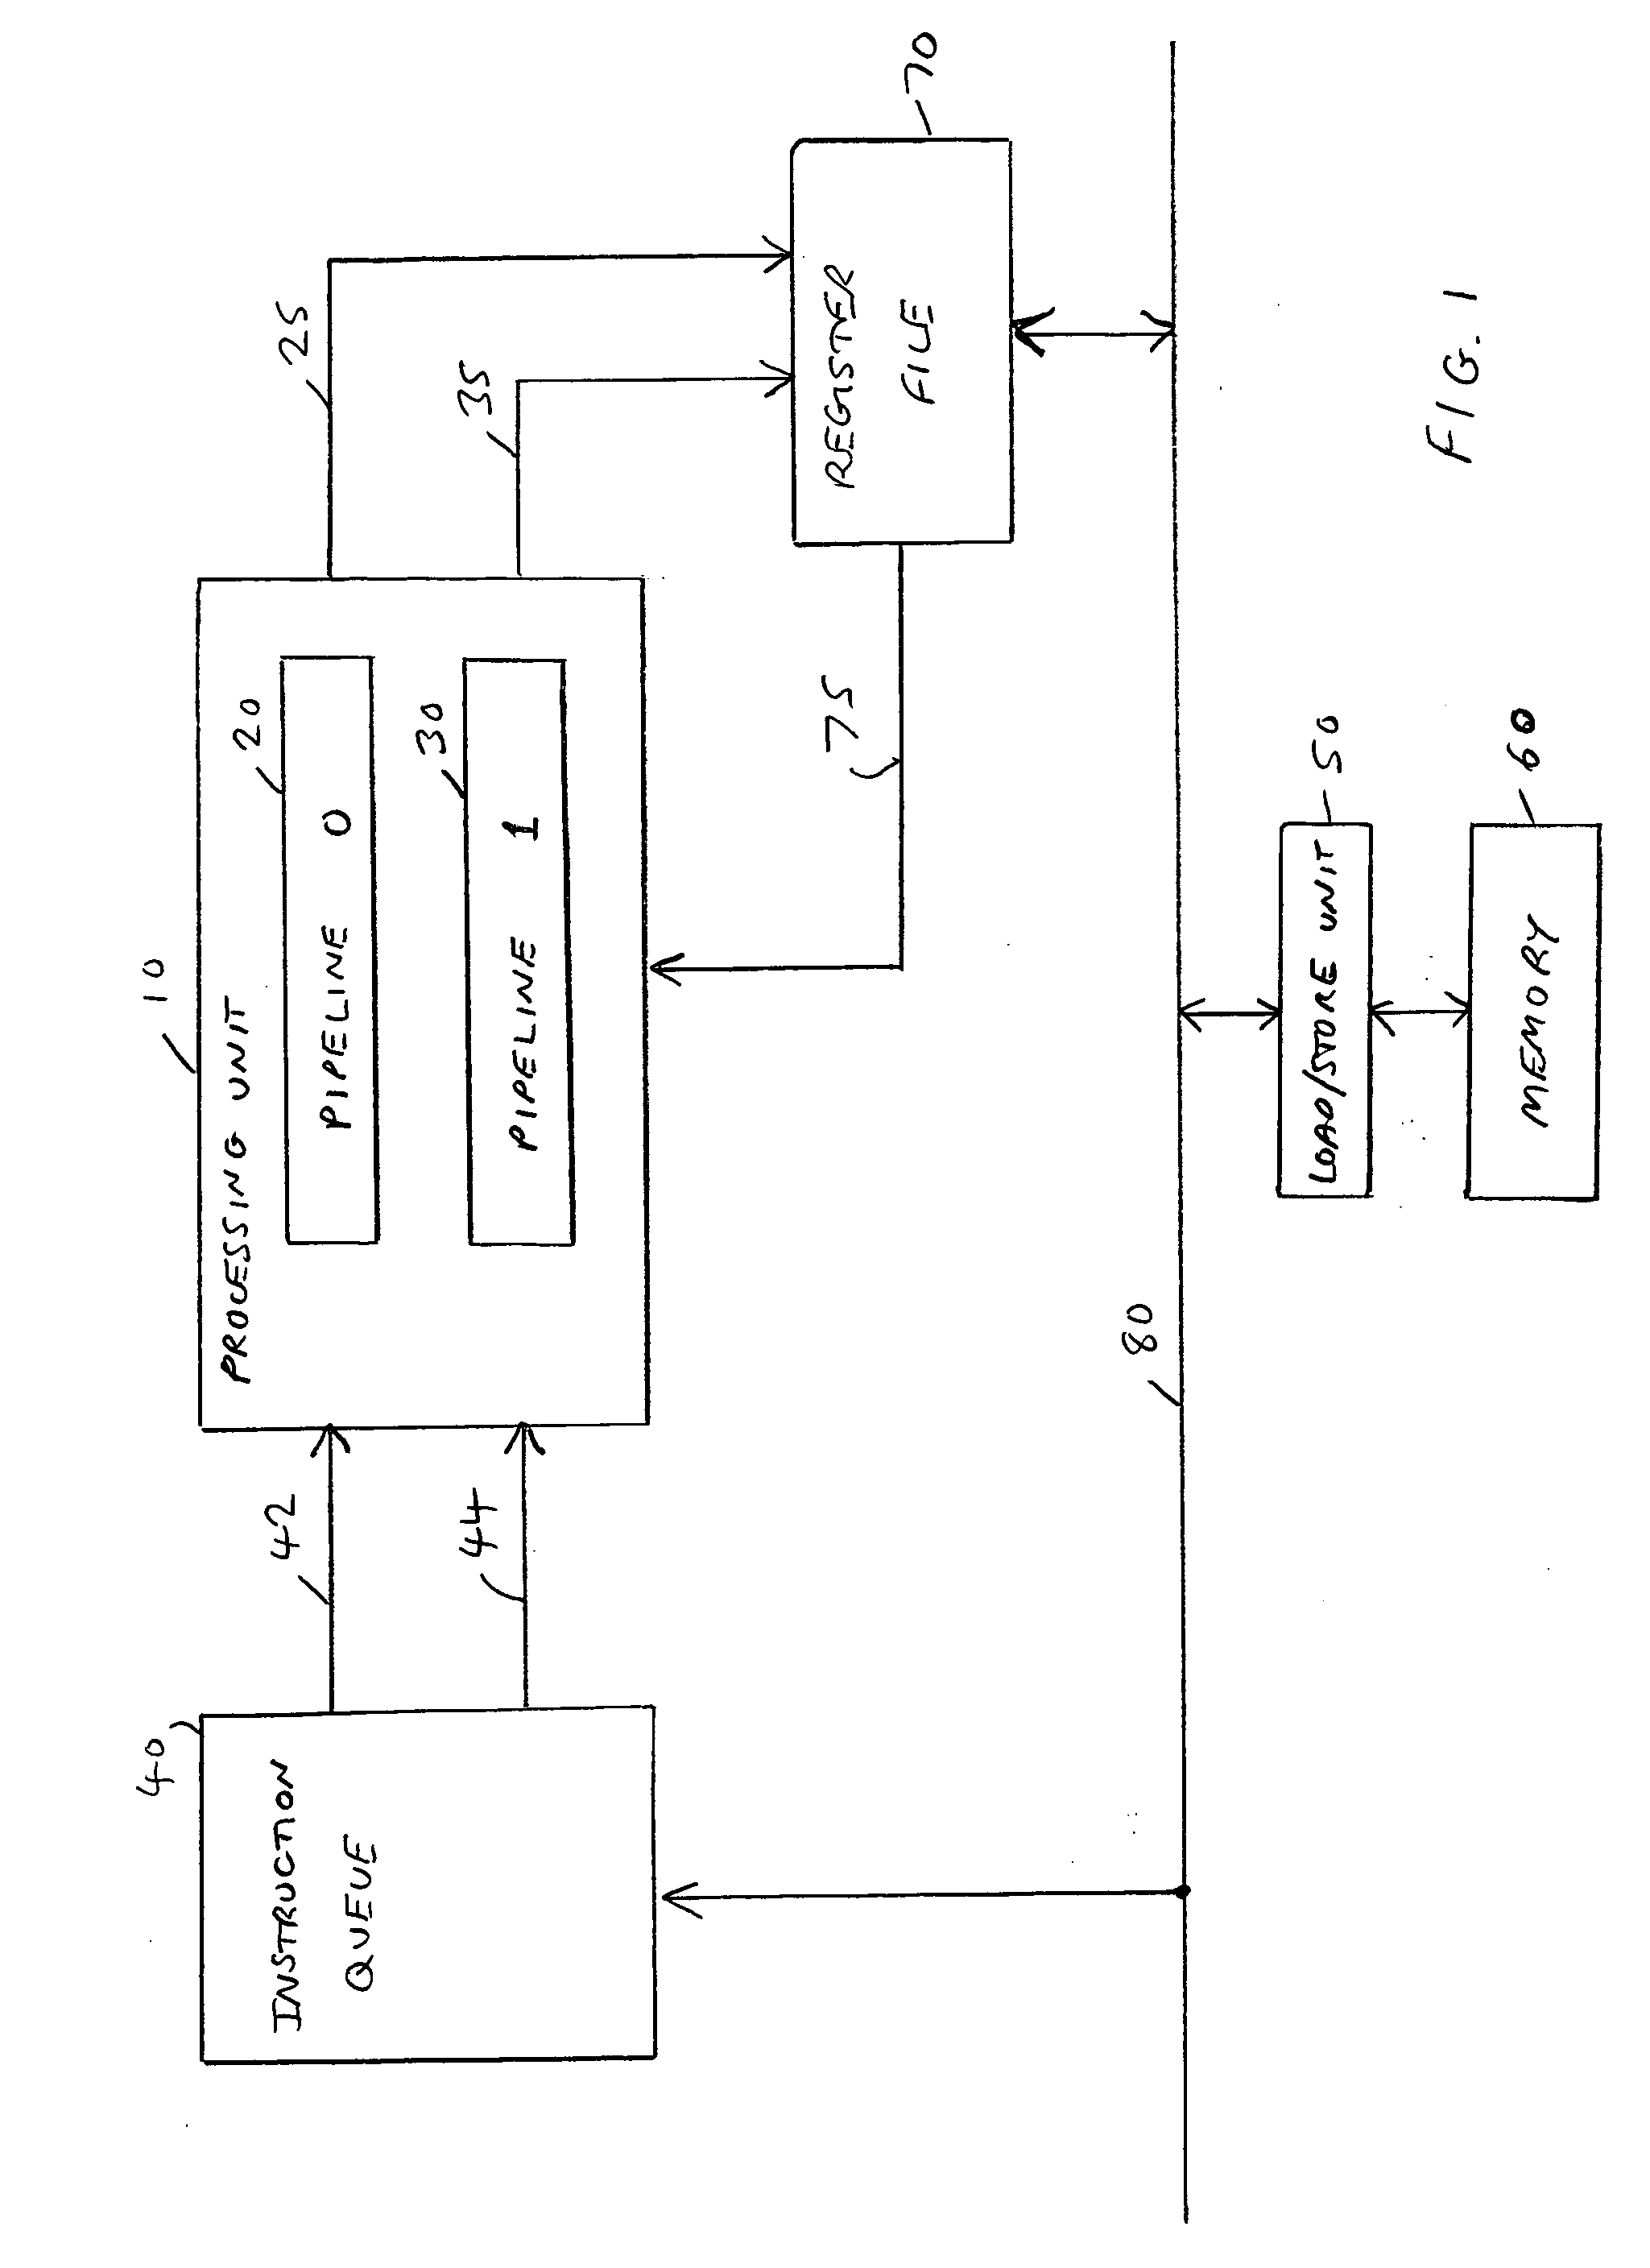 Data processing apparatus and method for executing a sequence of instructions including a multiple iteration instruction